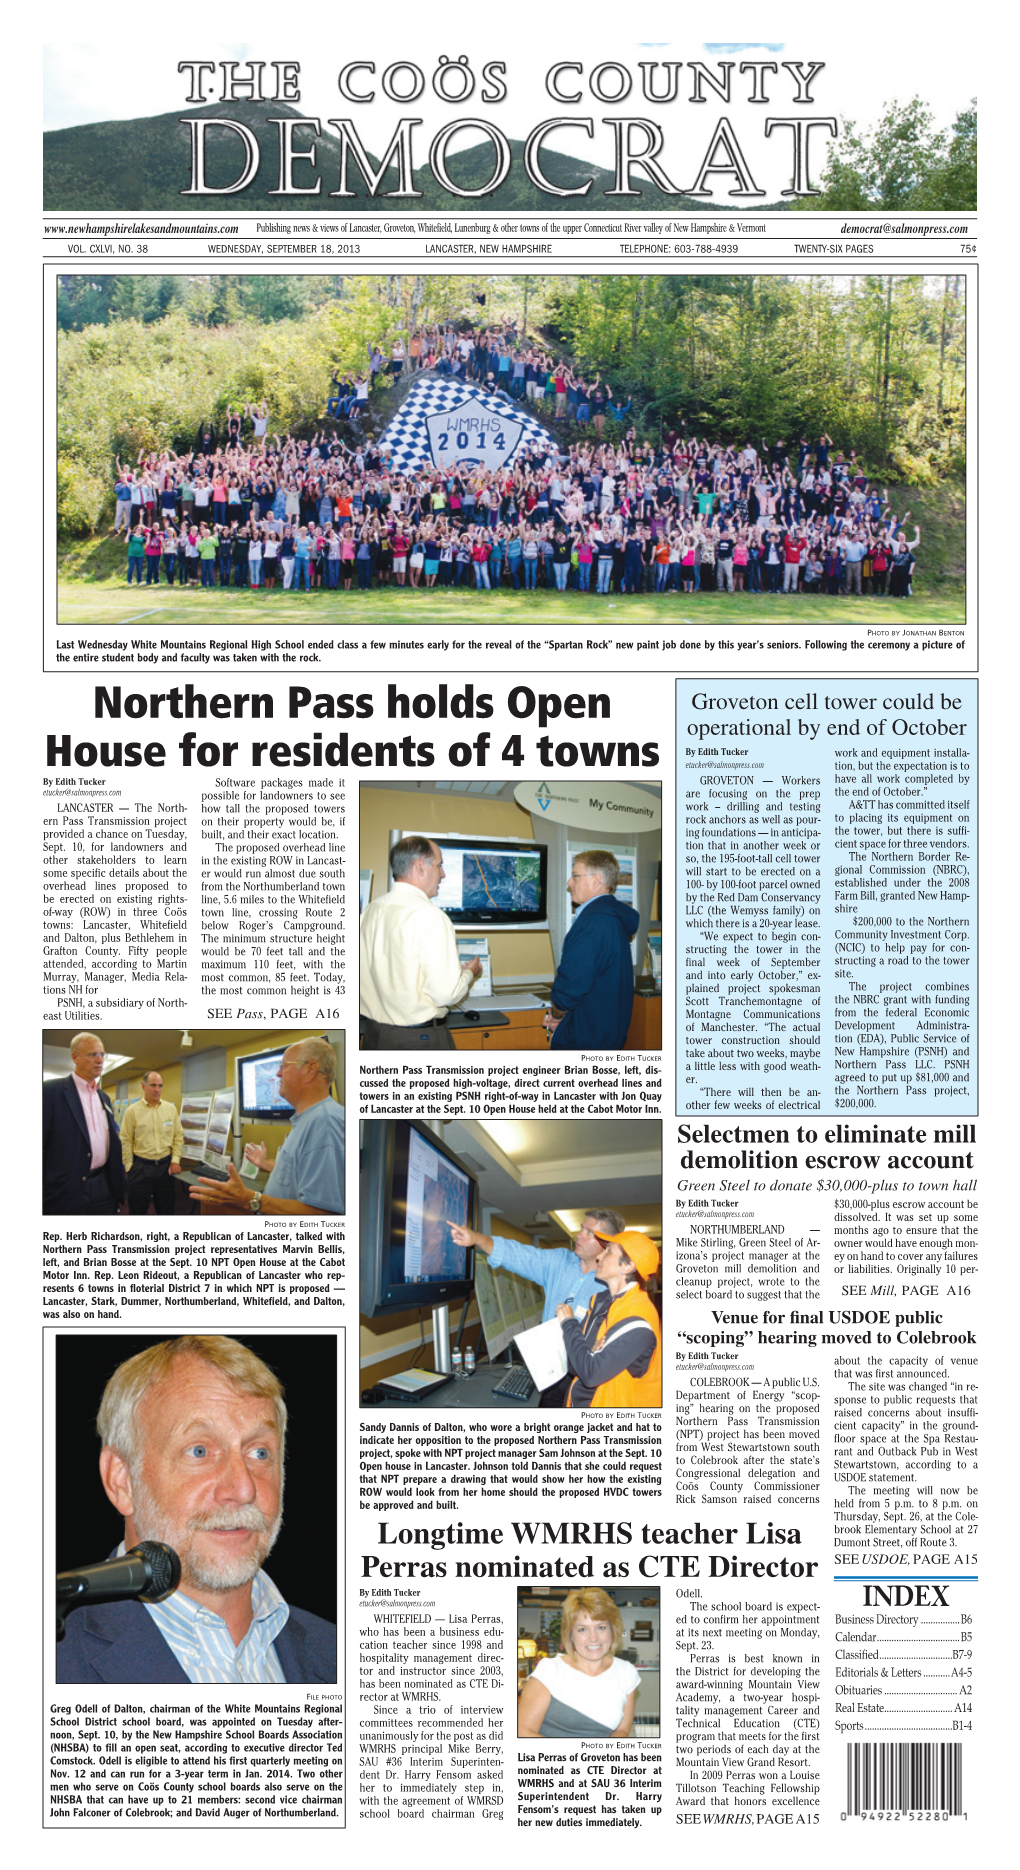 Northern Pass Holds Open House for Residents of 4 Towns